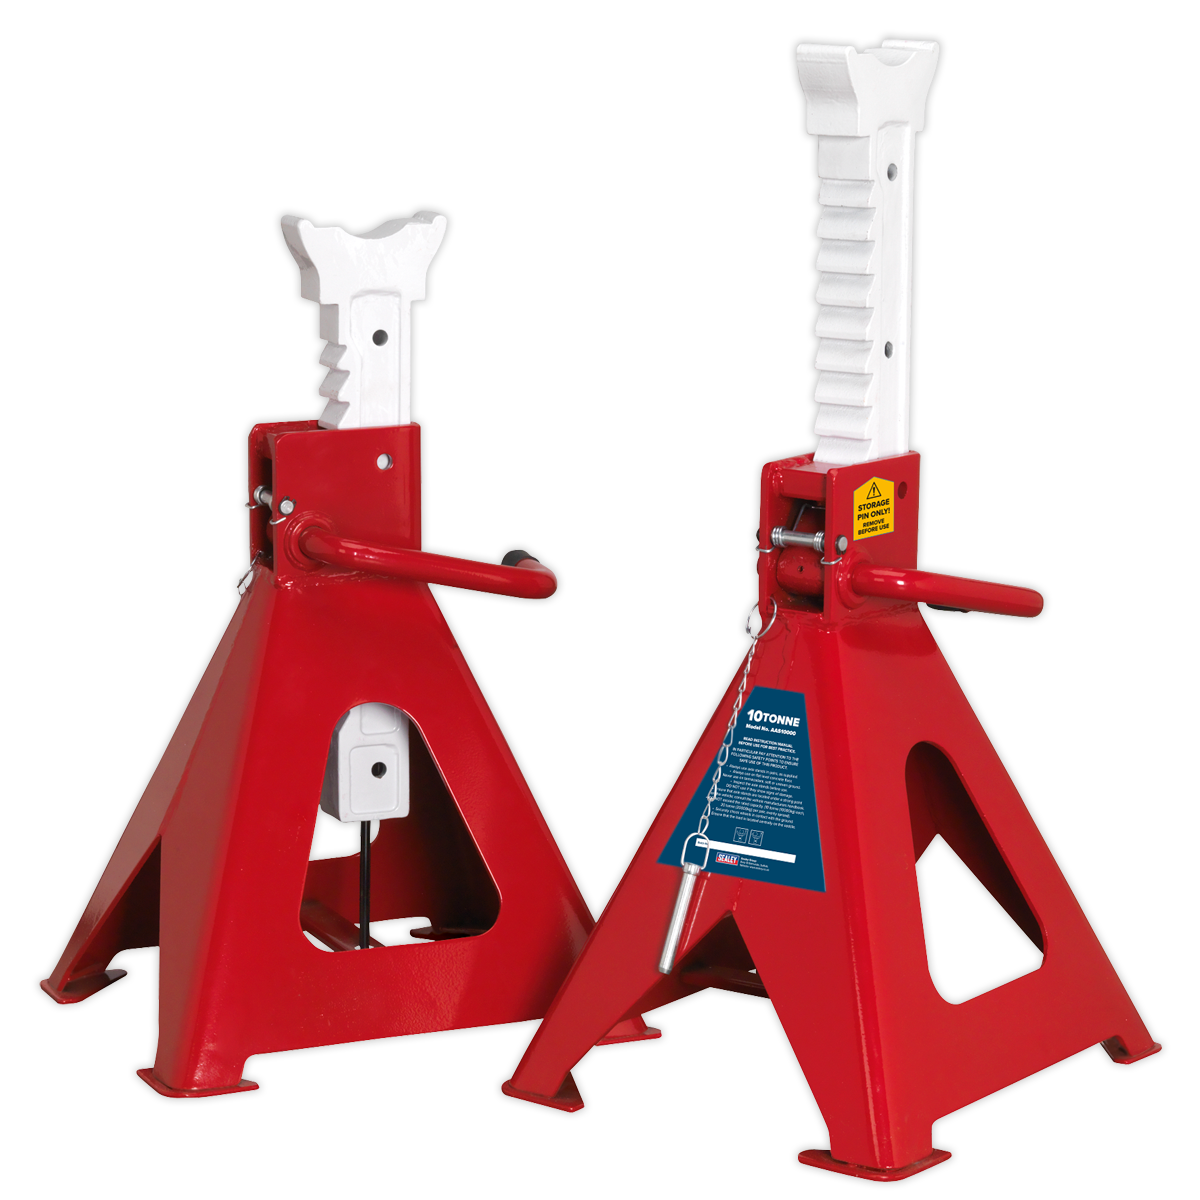 Axle Stands (Pair) 10 Tonne Capacity per Stand Auto Rise Ratchet - AAS10000 - Farming Parts